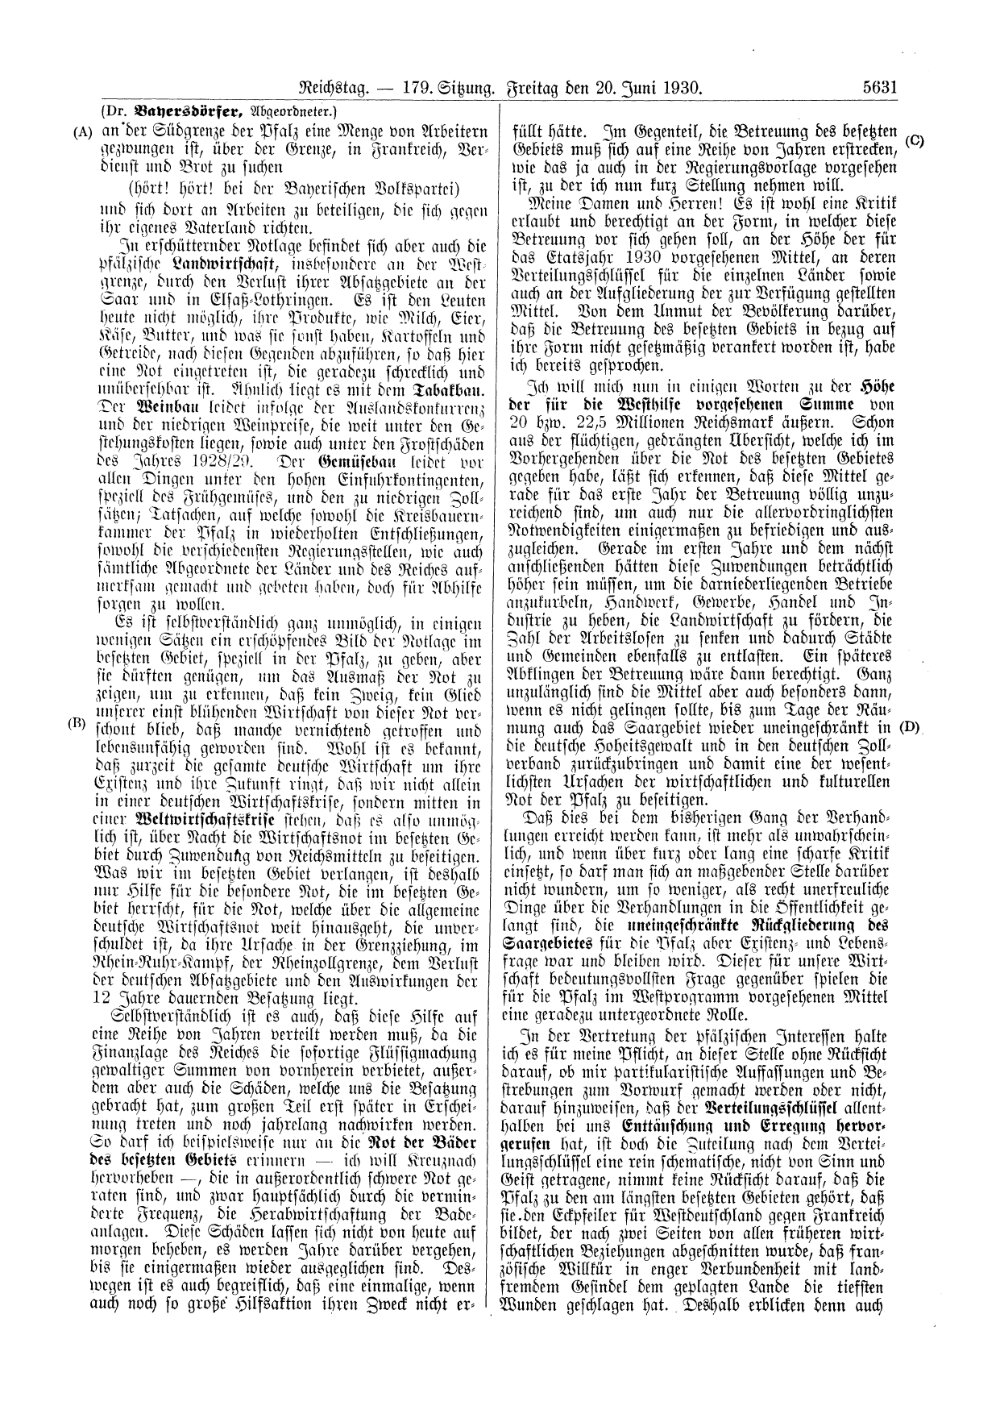 Scan of page 5631